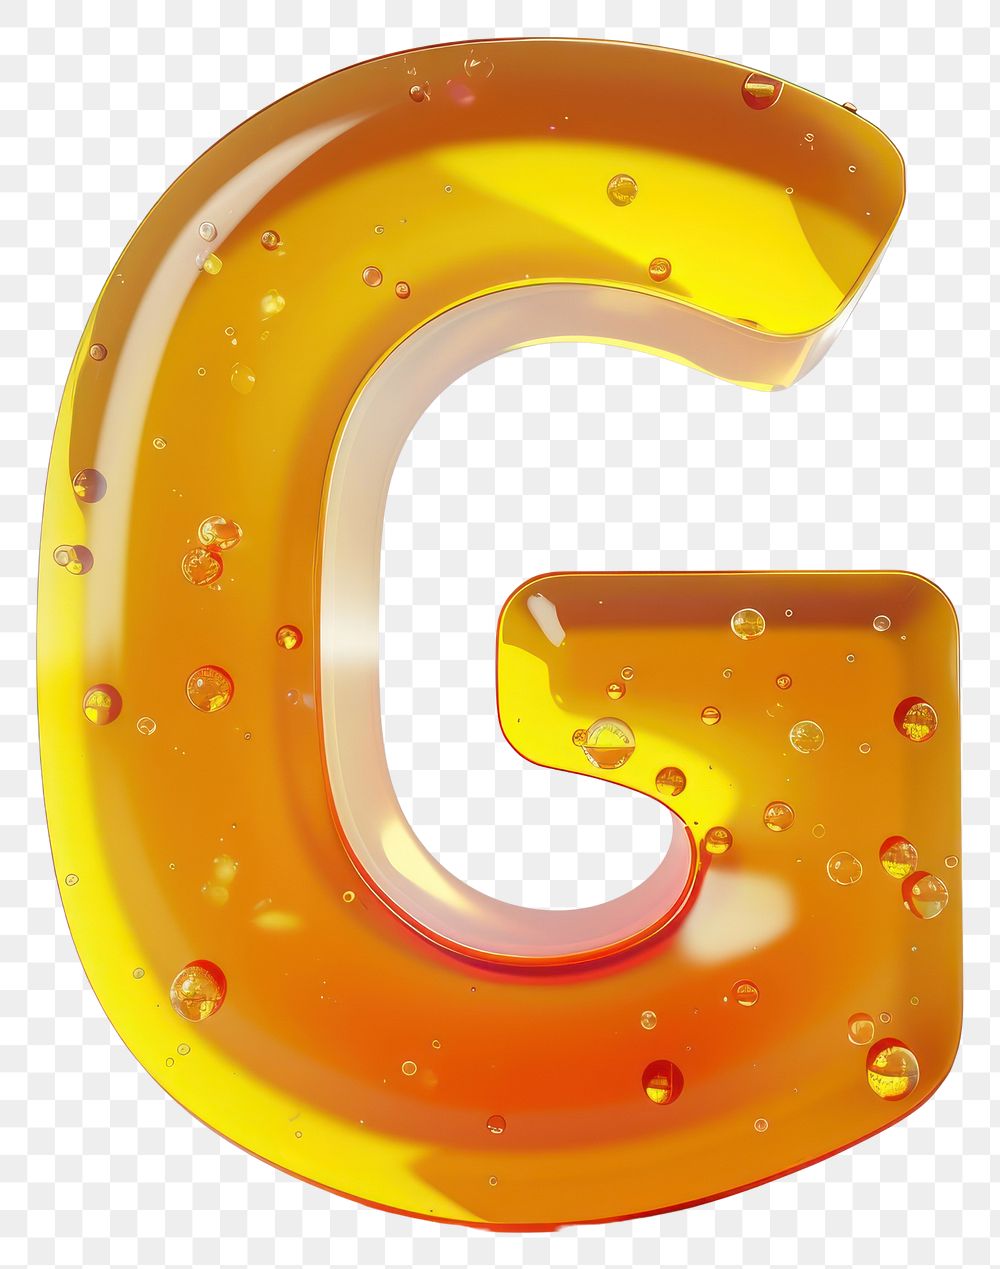 Letter G yellow number symbol.